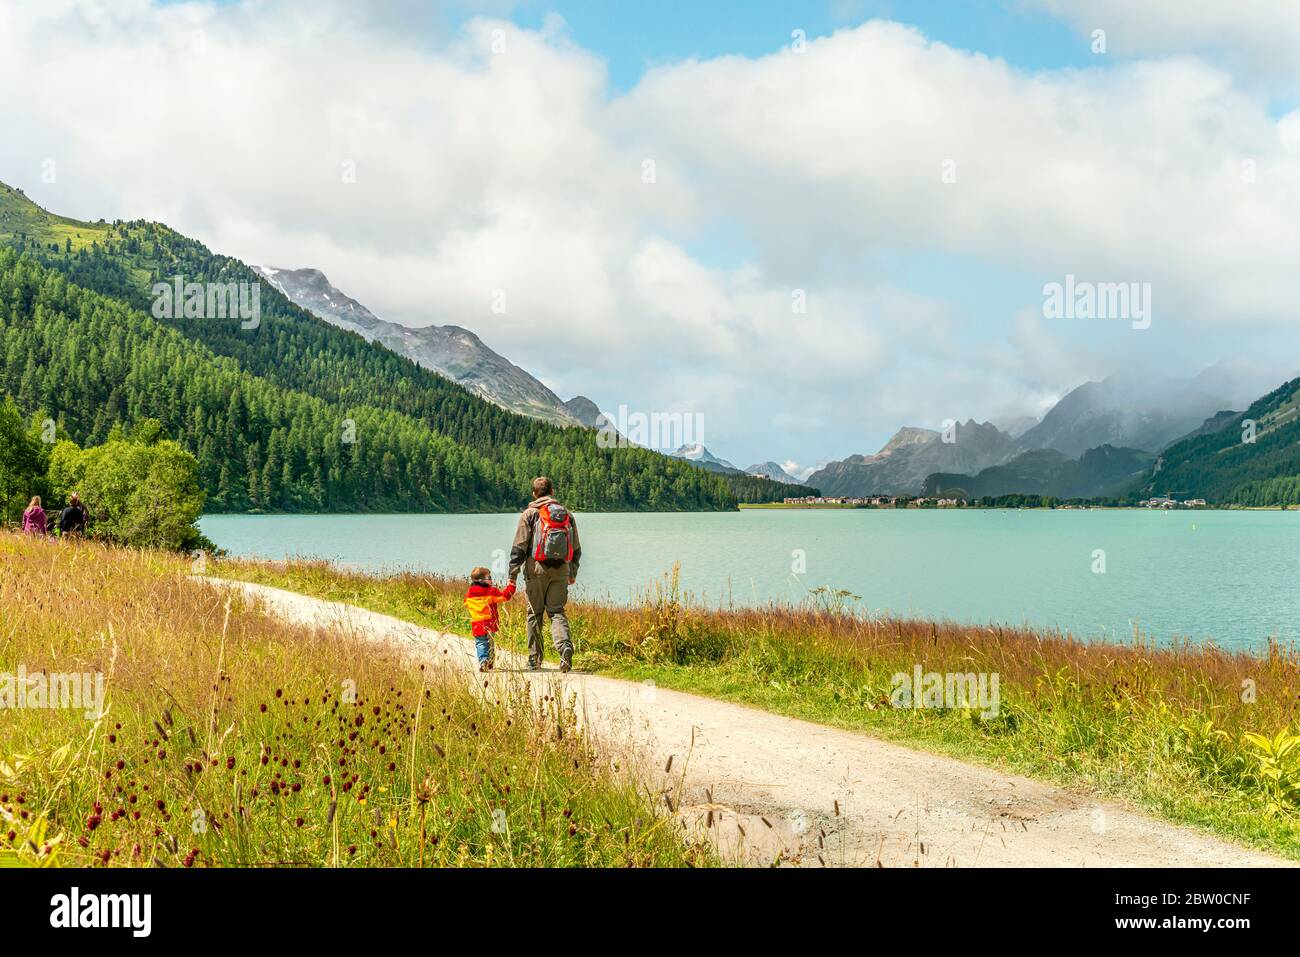 Father and Son hiking lakeside at Lake Silvaplana in a mountain landscape Stock Photo